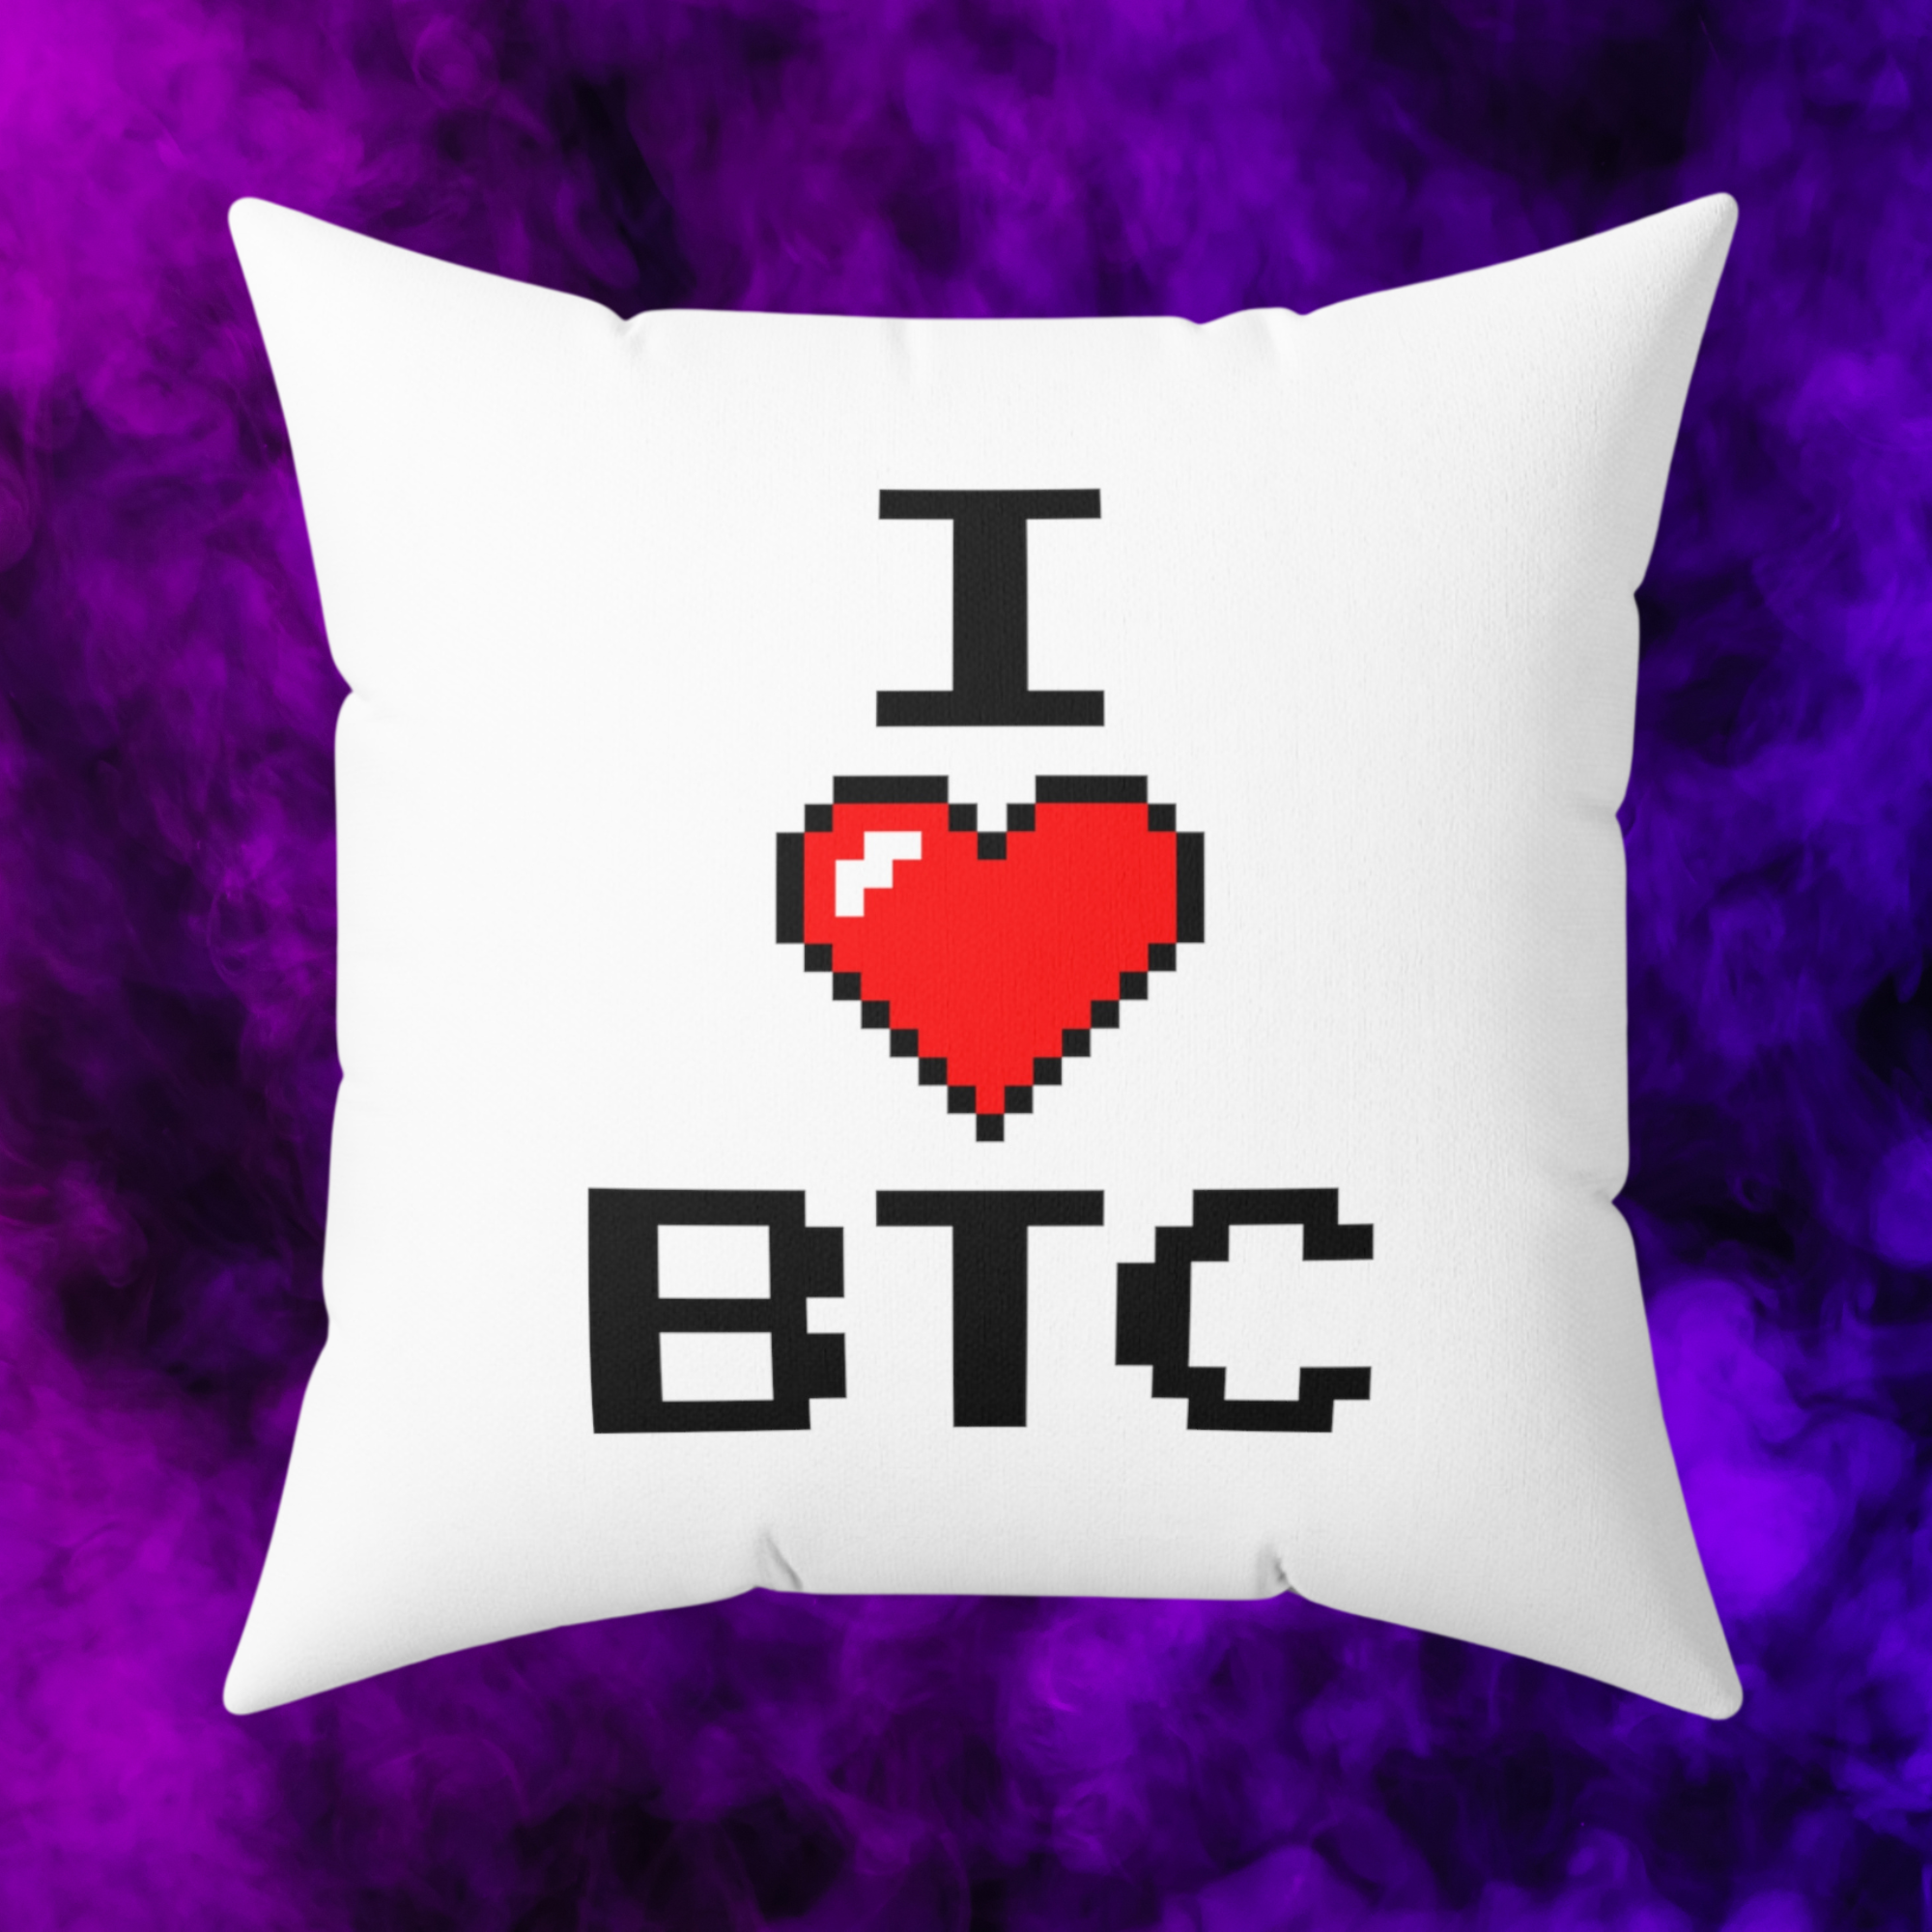 Bitcoin Home Decor - I Love BTC Pillow (Pixel Style) available from NEONCRYPTO STORE.